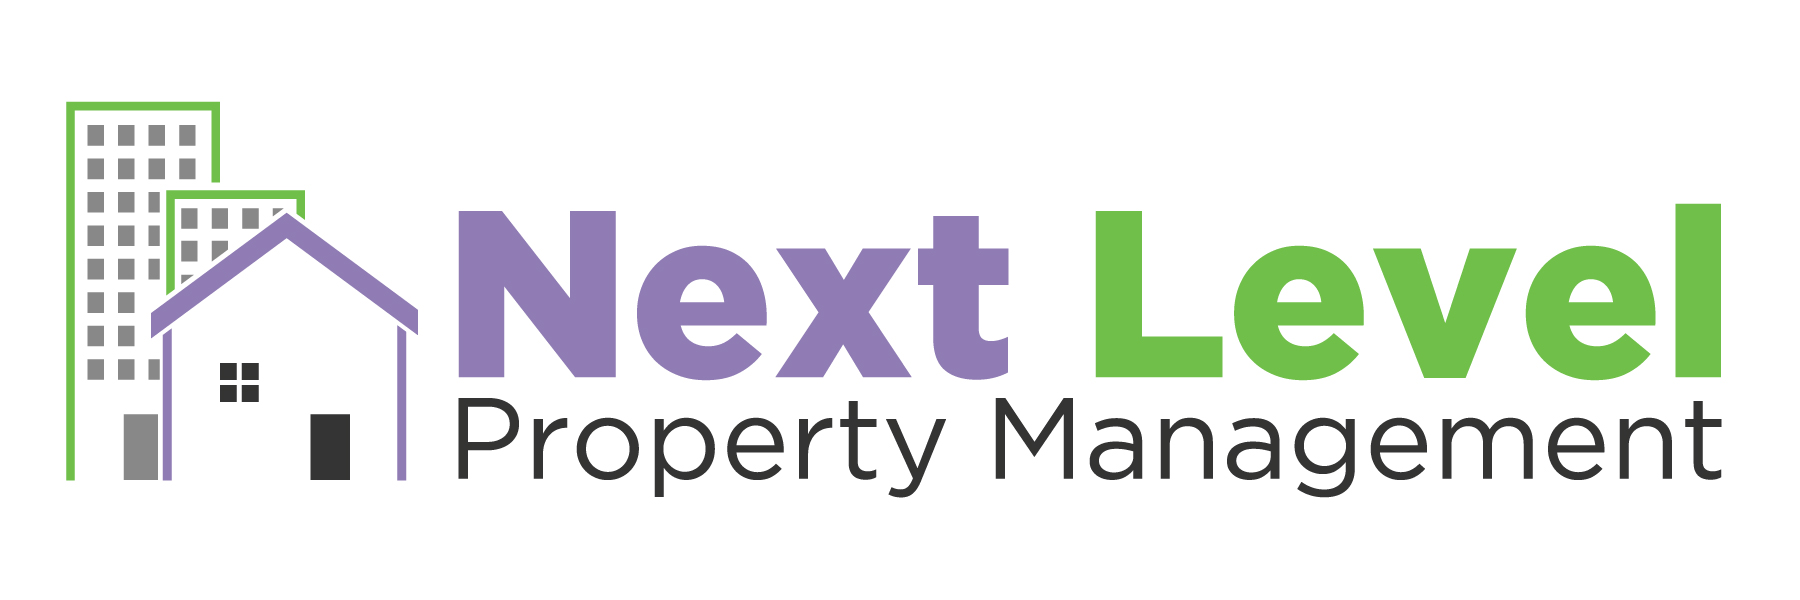 Next Level Property Management – Commercial Cleaning